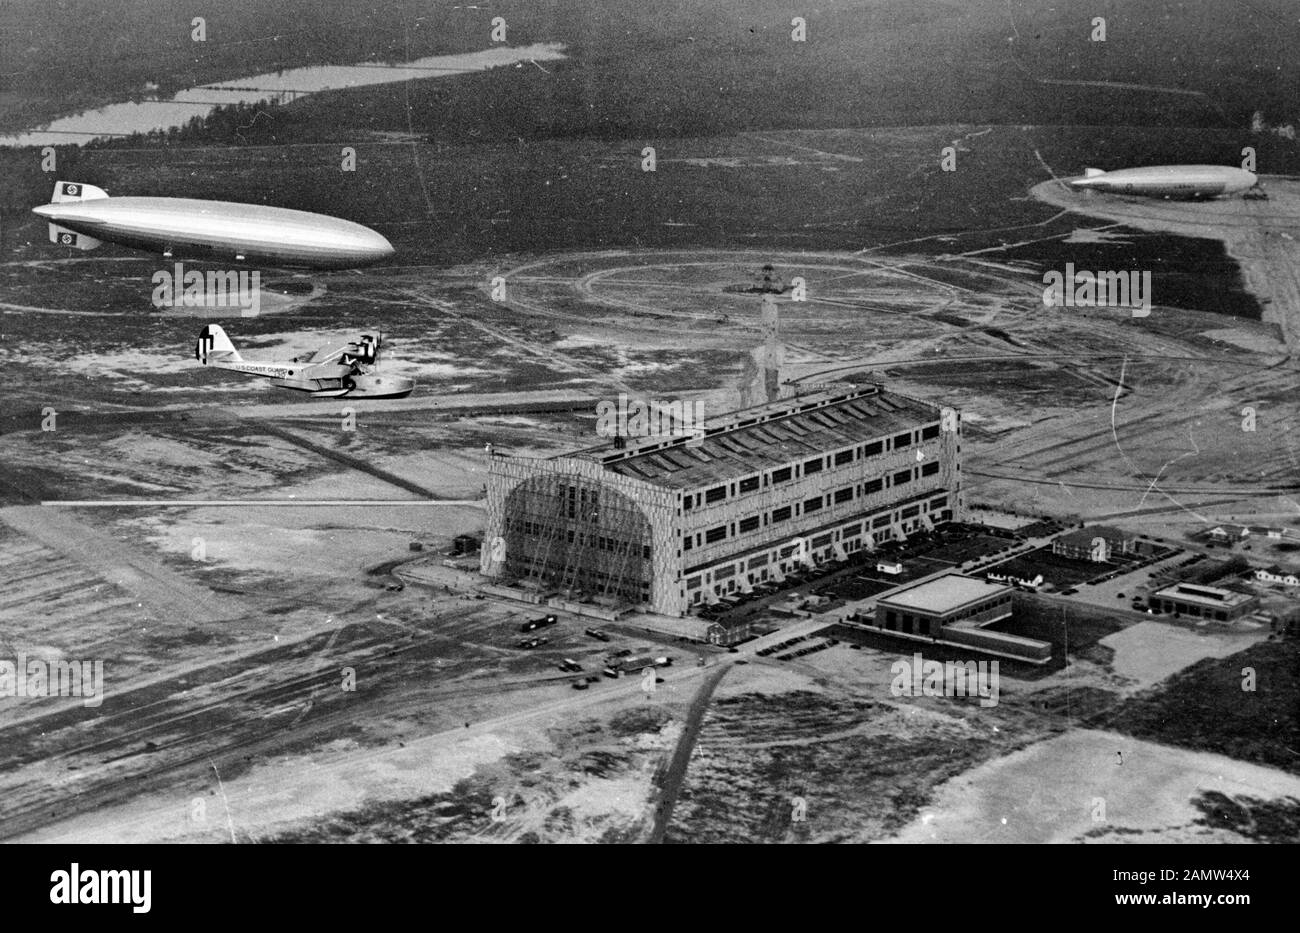 The U.S. Coast Guard Douglas RD-4 Spica (s/n V-125) escorts the German Zeppelin LZ 129 Hindenburg on arrival at Lakehurst, New Jersey (USA), after its inaugural flight from Friedrichshafen, Germany, on the early morning of 9 May 1936. The decommissioned U.S. Navy airship USS Los Angeles (ZR-3) is visible in the background. May 9, 1936 Stock Photo